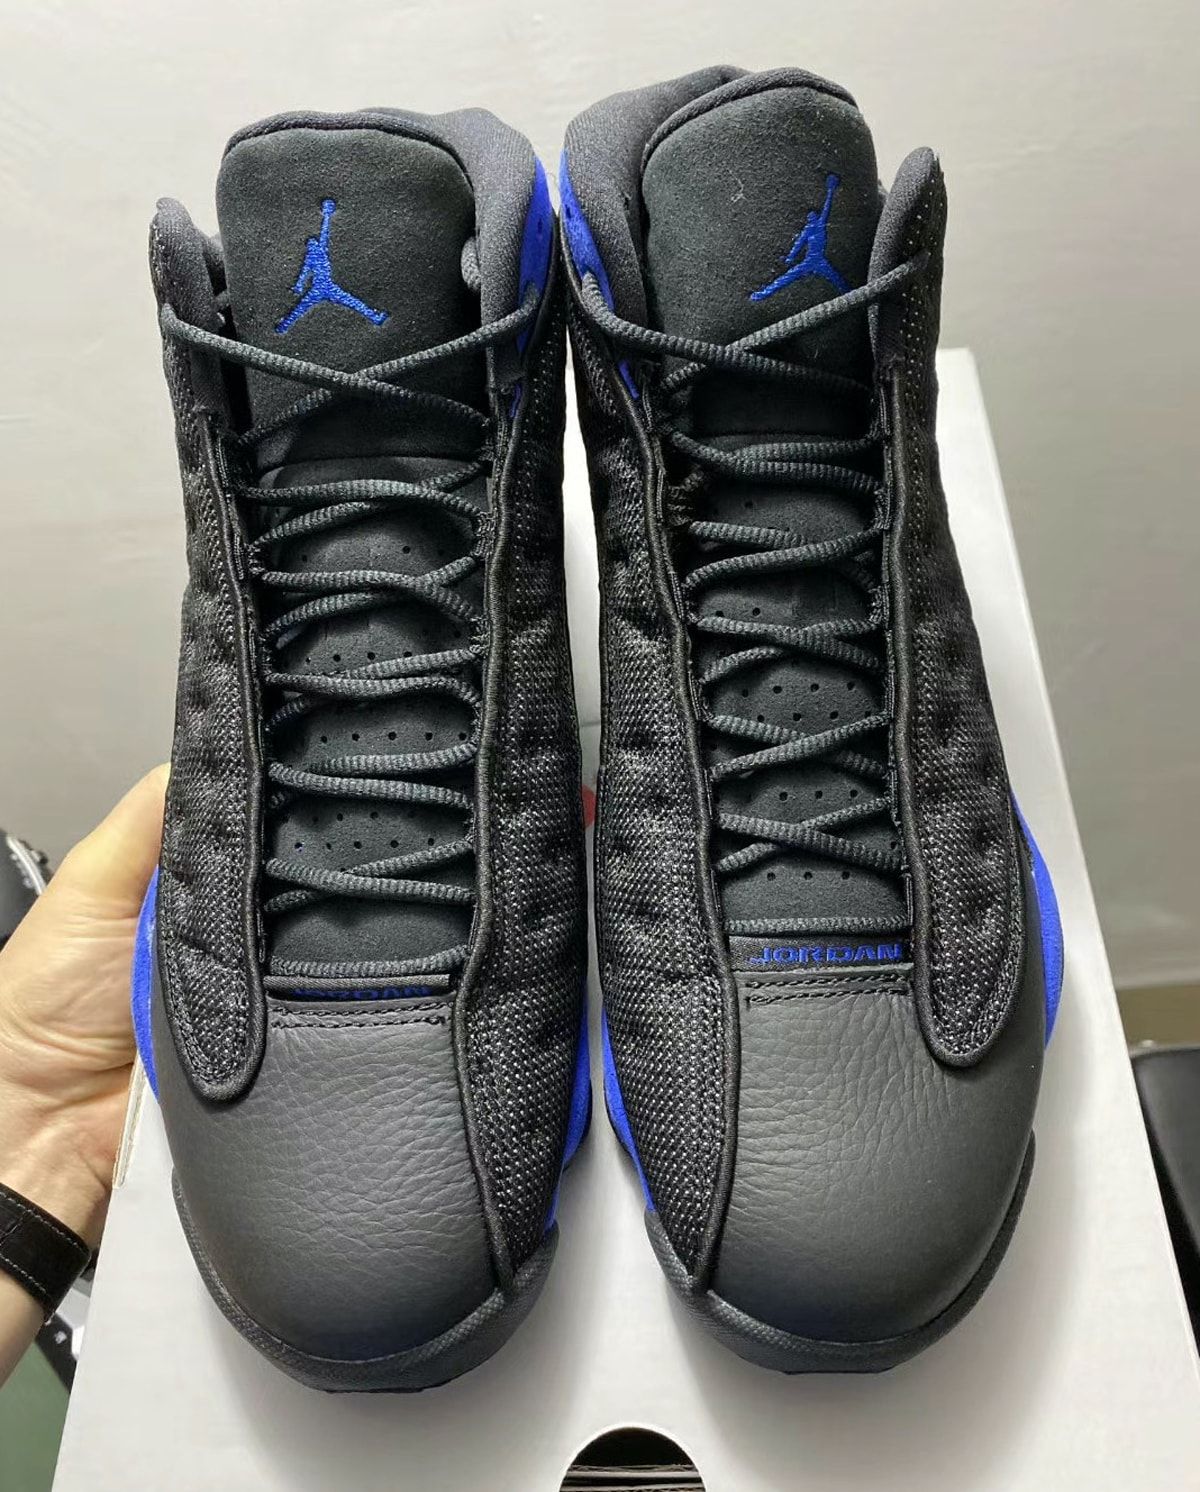 black and blue 13s 2020